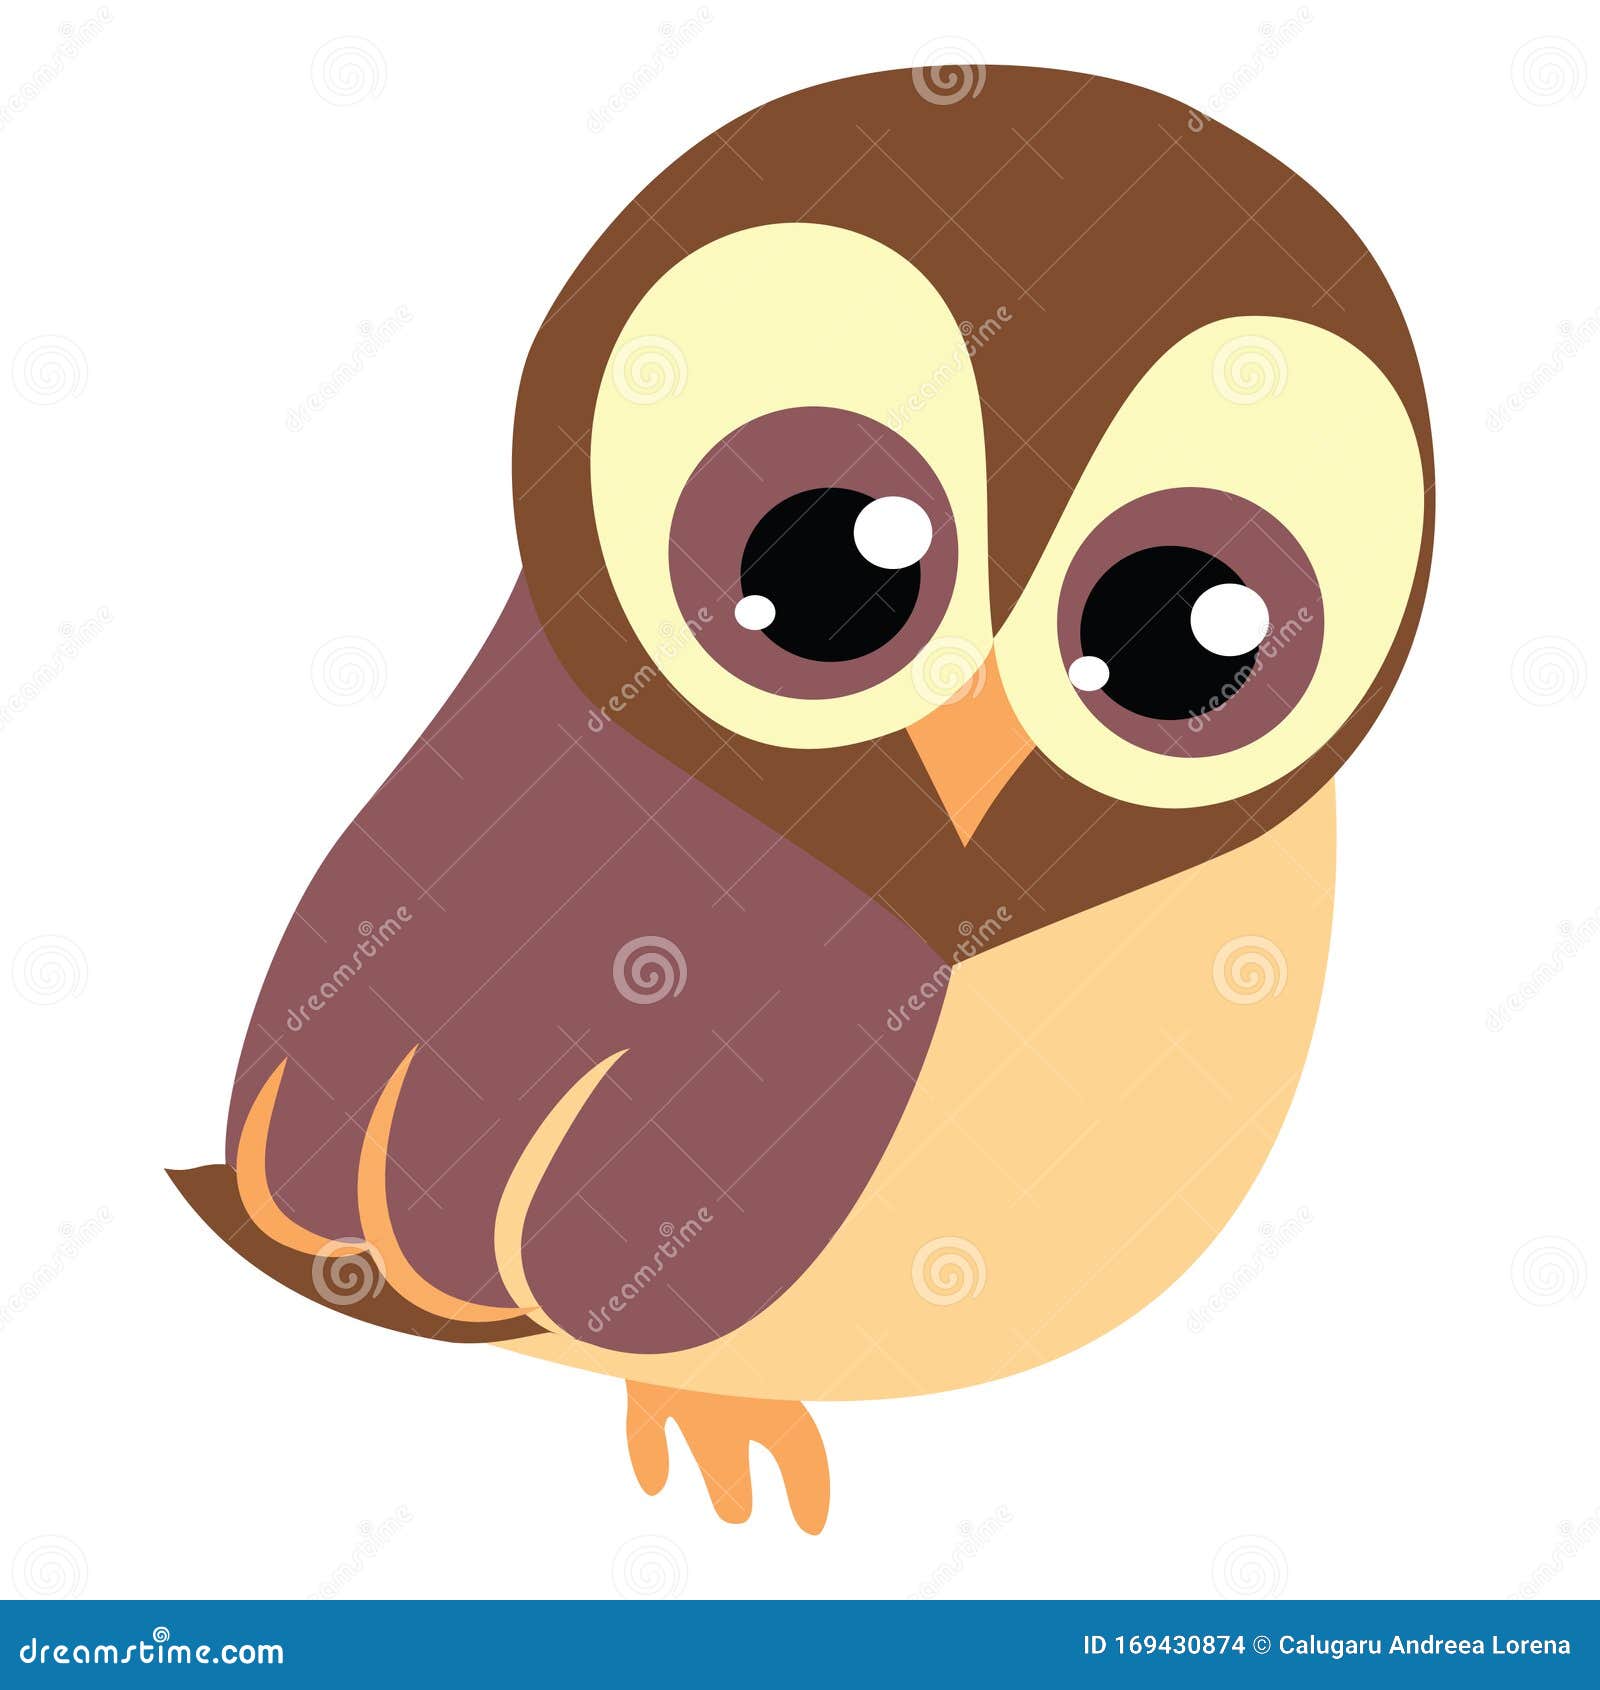 Cute Baby Brawn Owl with Big Eyes Stock Vector - Illustration of child,  comic: 169430874